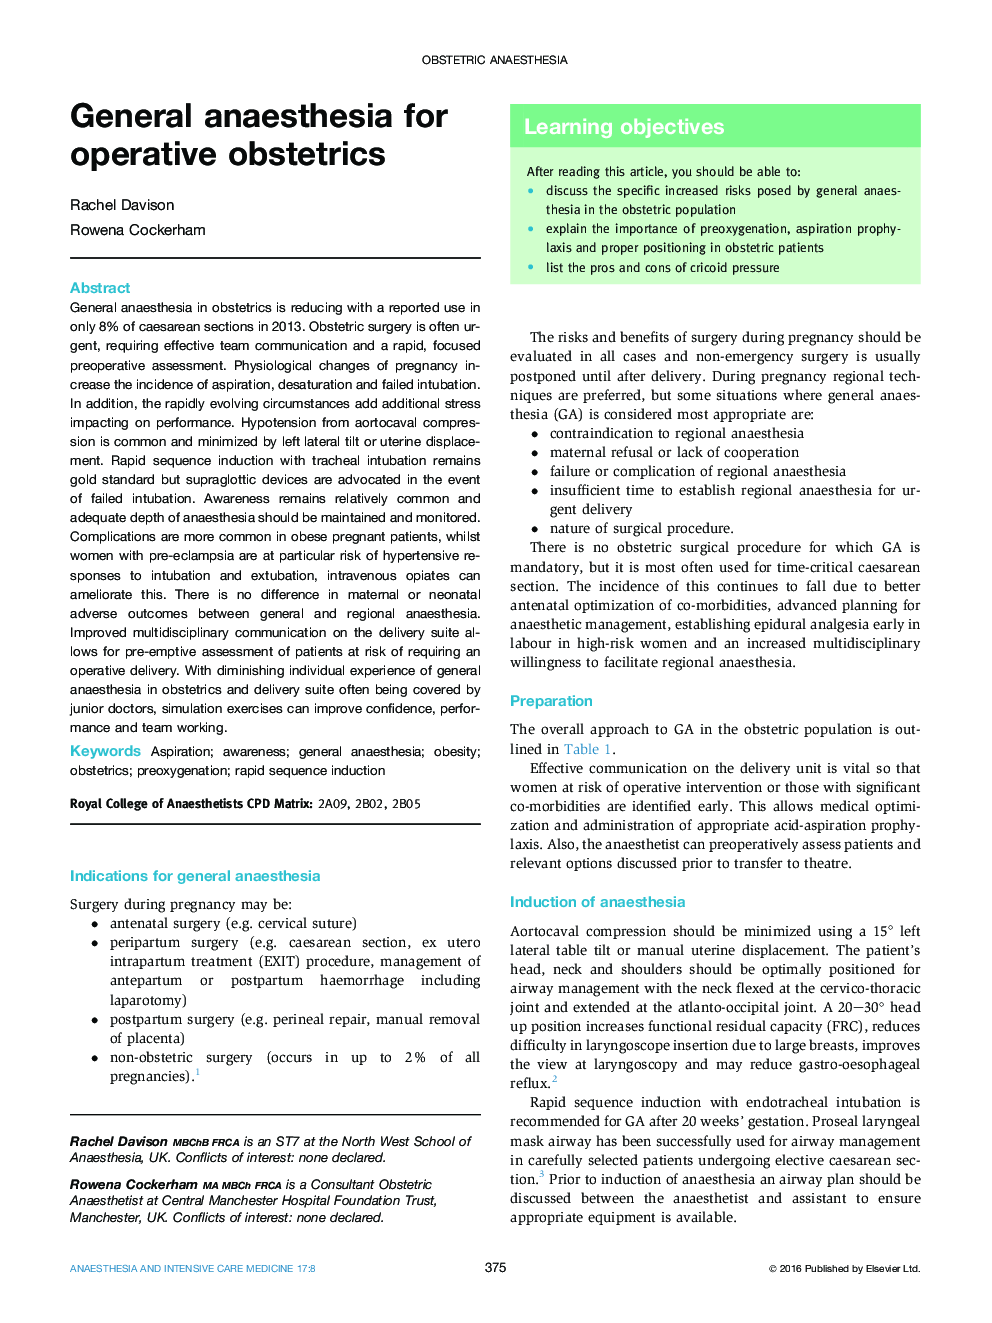 General anaesthesia for operative obstetrics